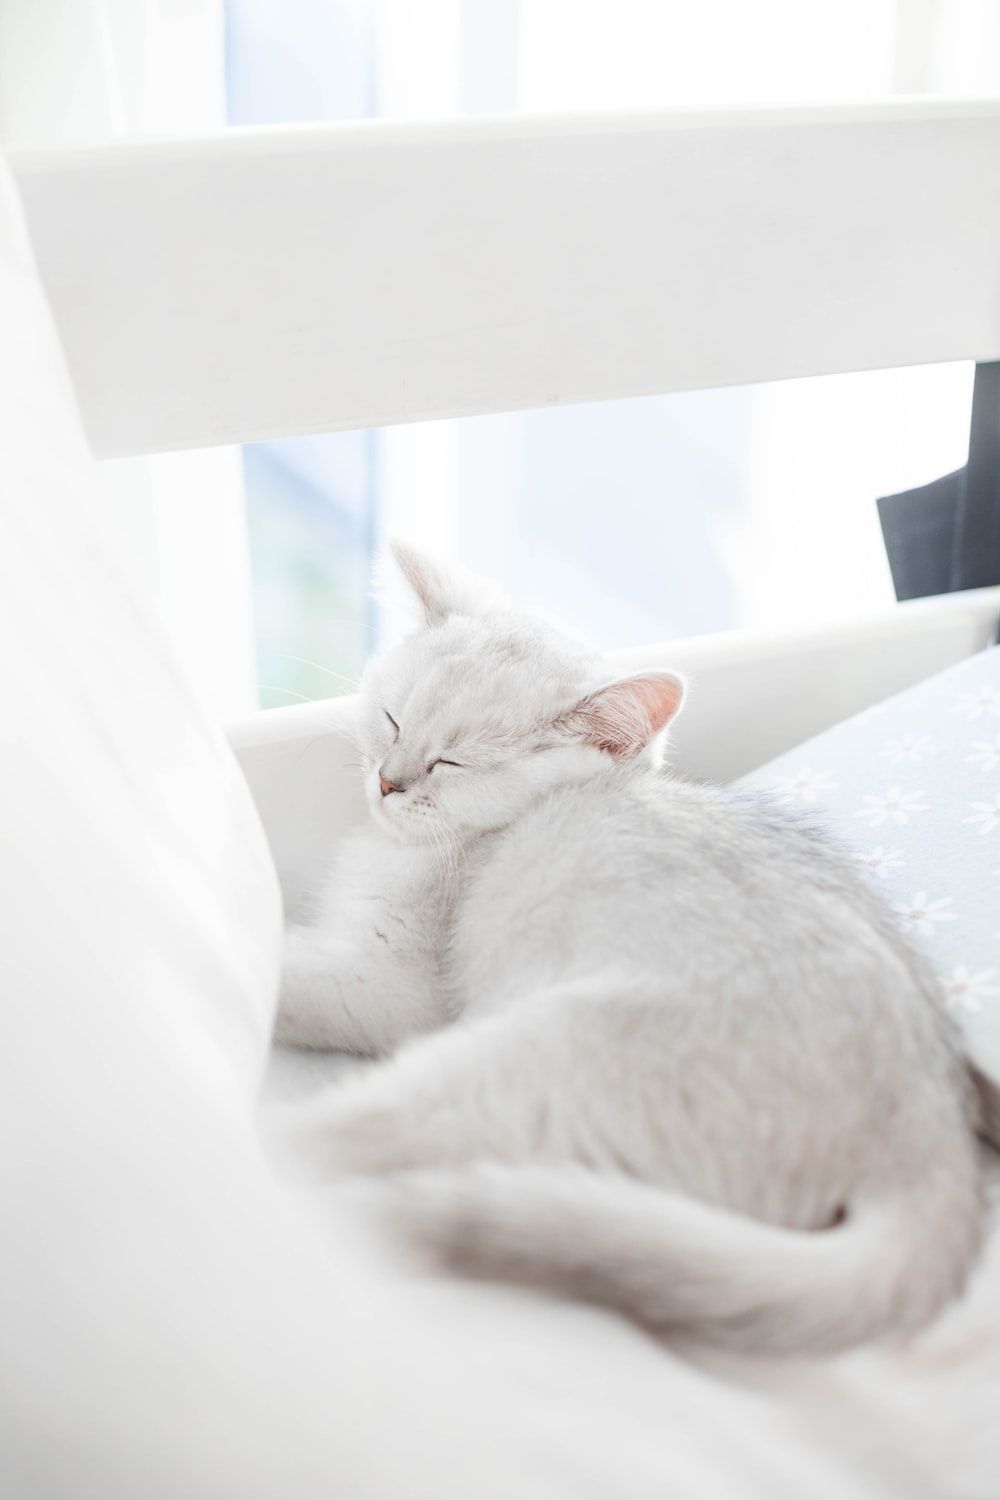 A white cat sleeping on a white chair - Cat